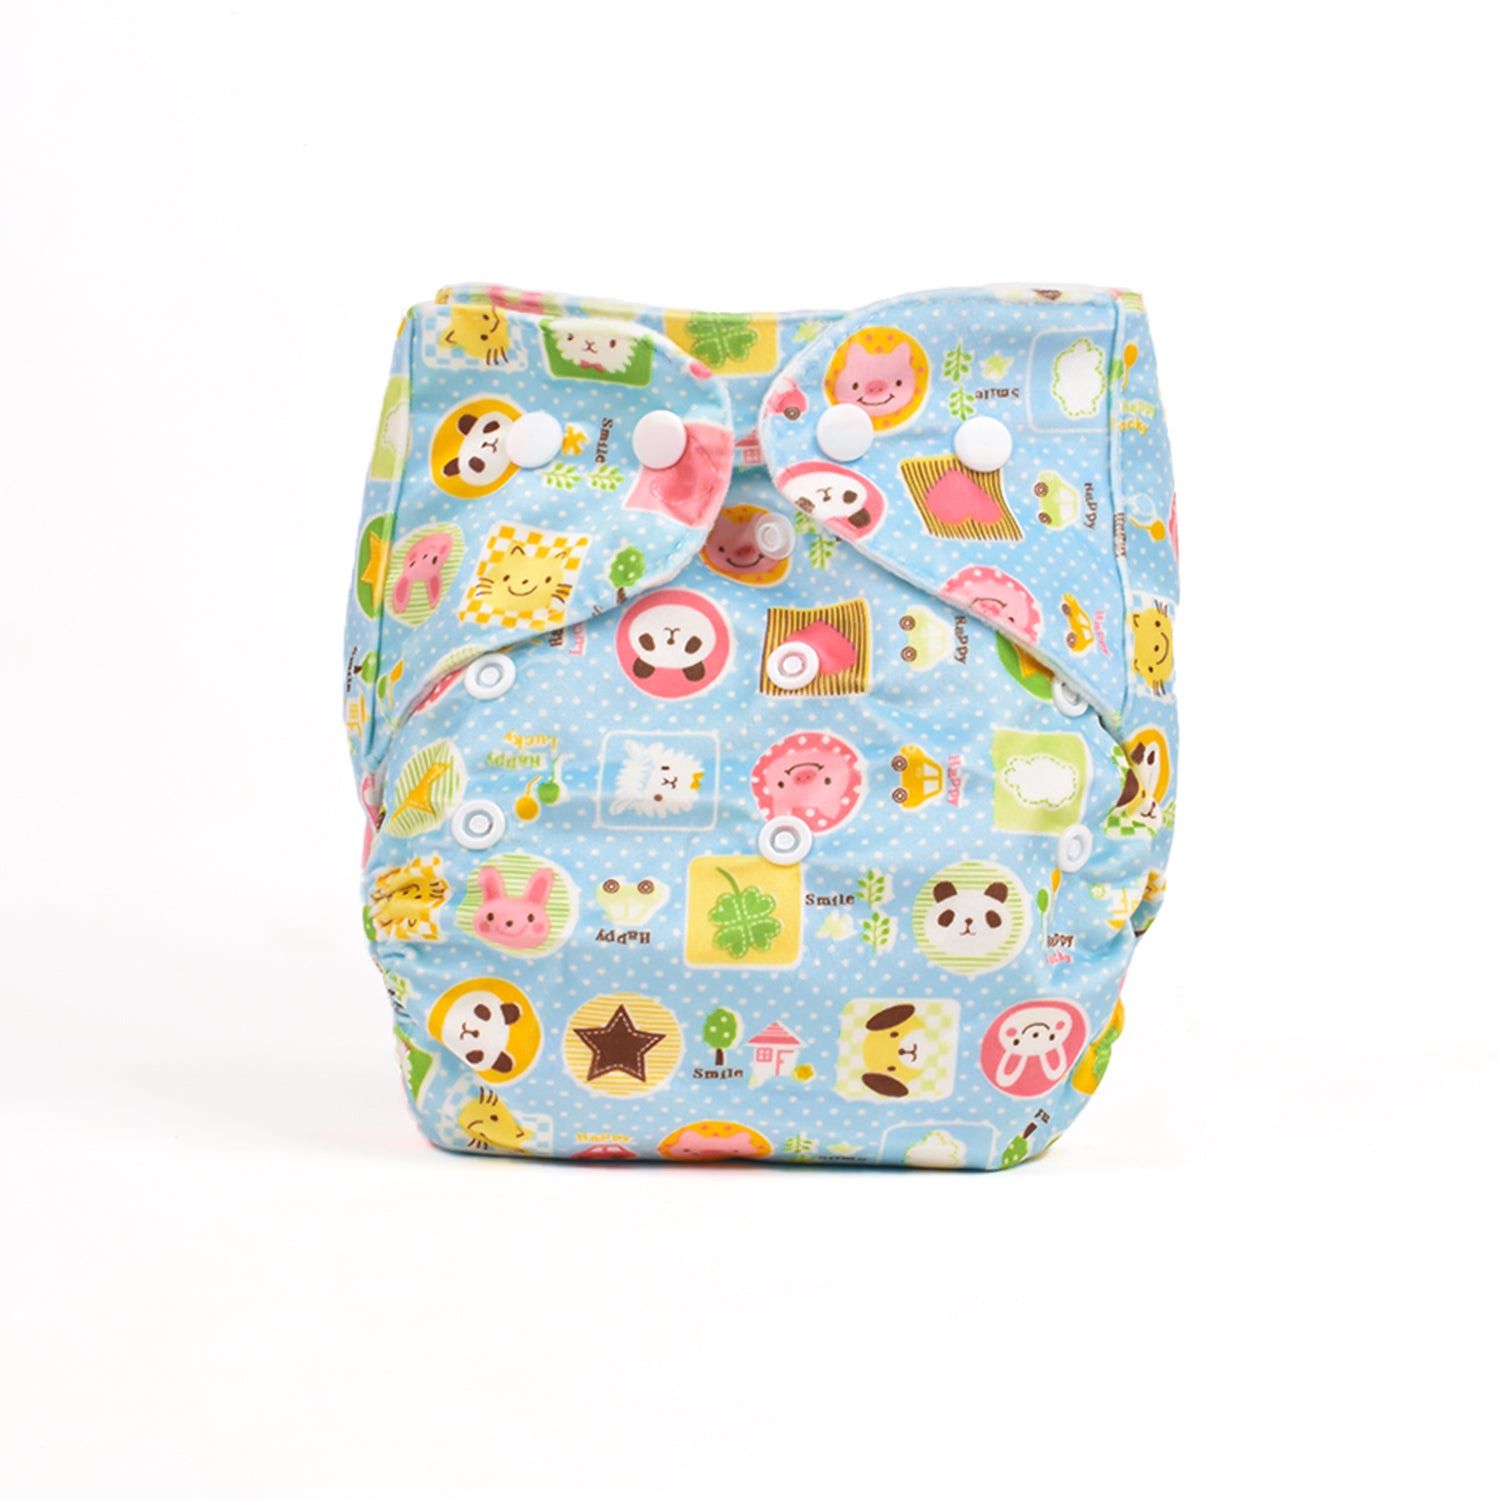 Baby Reusable Cotton Printed Pocket Diapers With 1 Inserts - Pack of 1 Panda